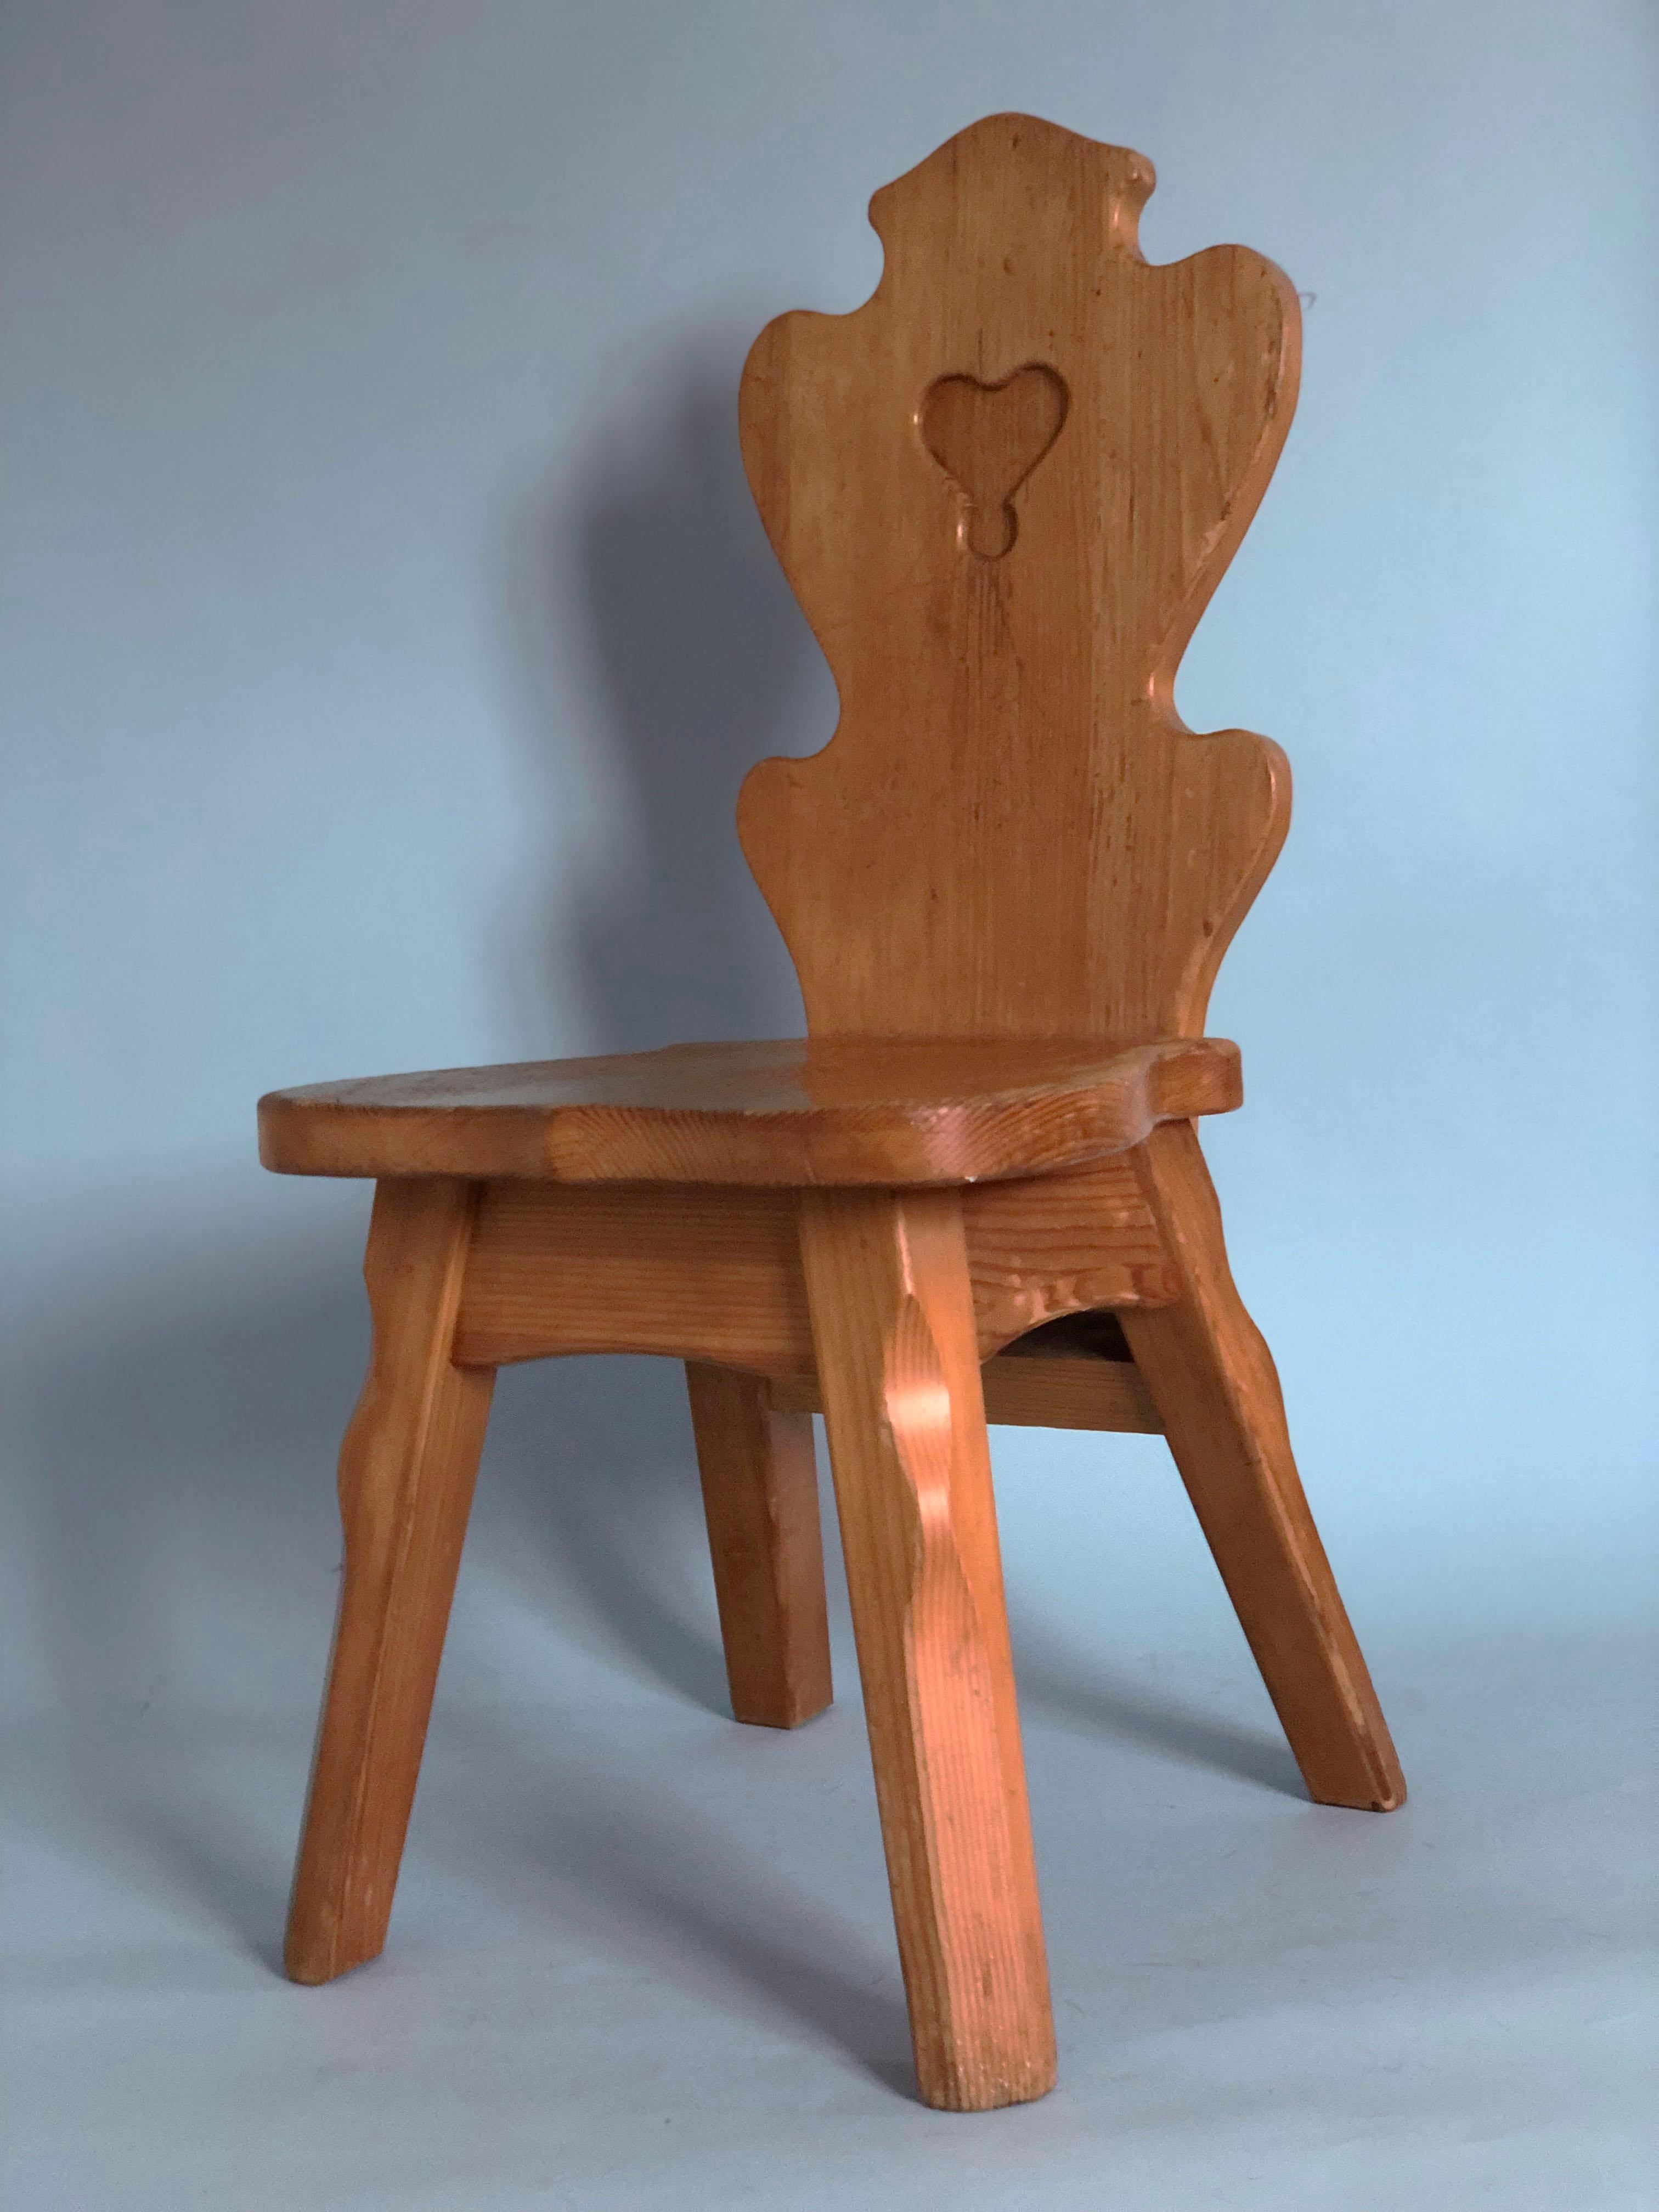 Mid Century Scandinavian dining chairs from Sweden, 1960s. The seat and back are shaped for a good sitting position. A heart is cut in the back. Very thick, angular design typical of the brutalist aesthetic. They are made from solid pine and are